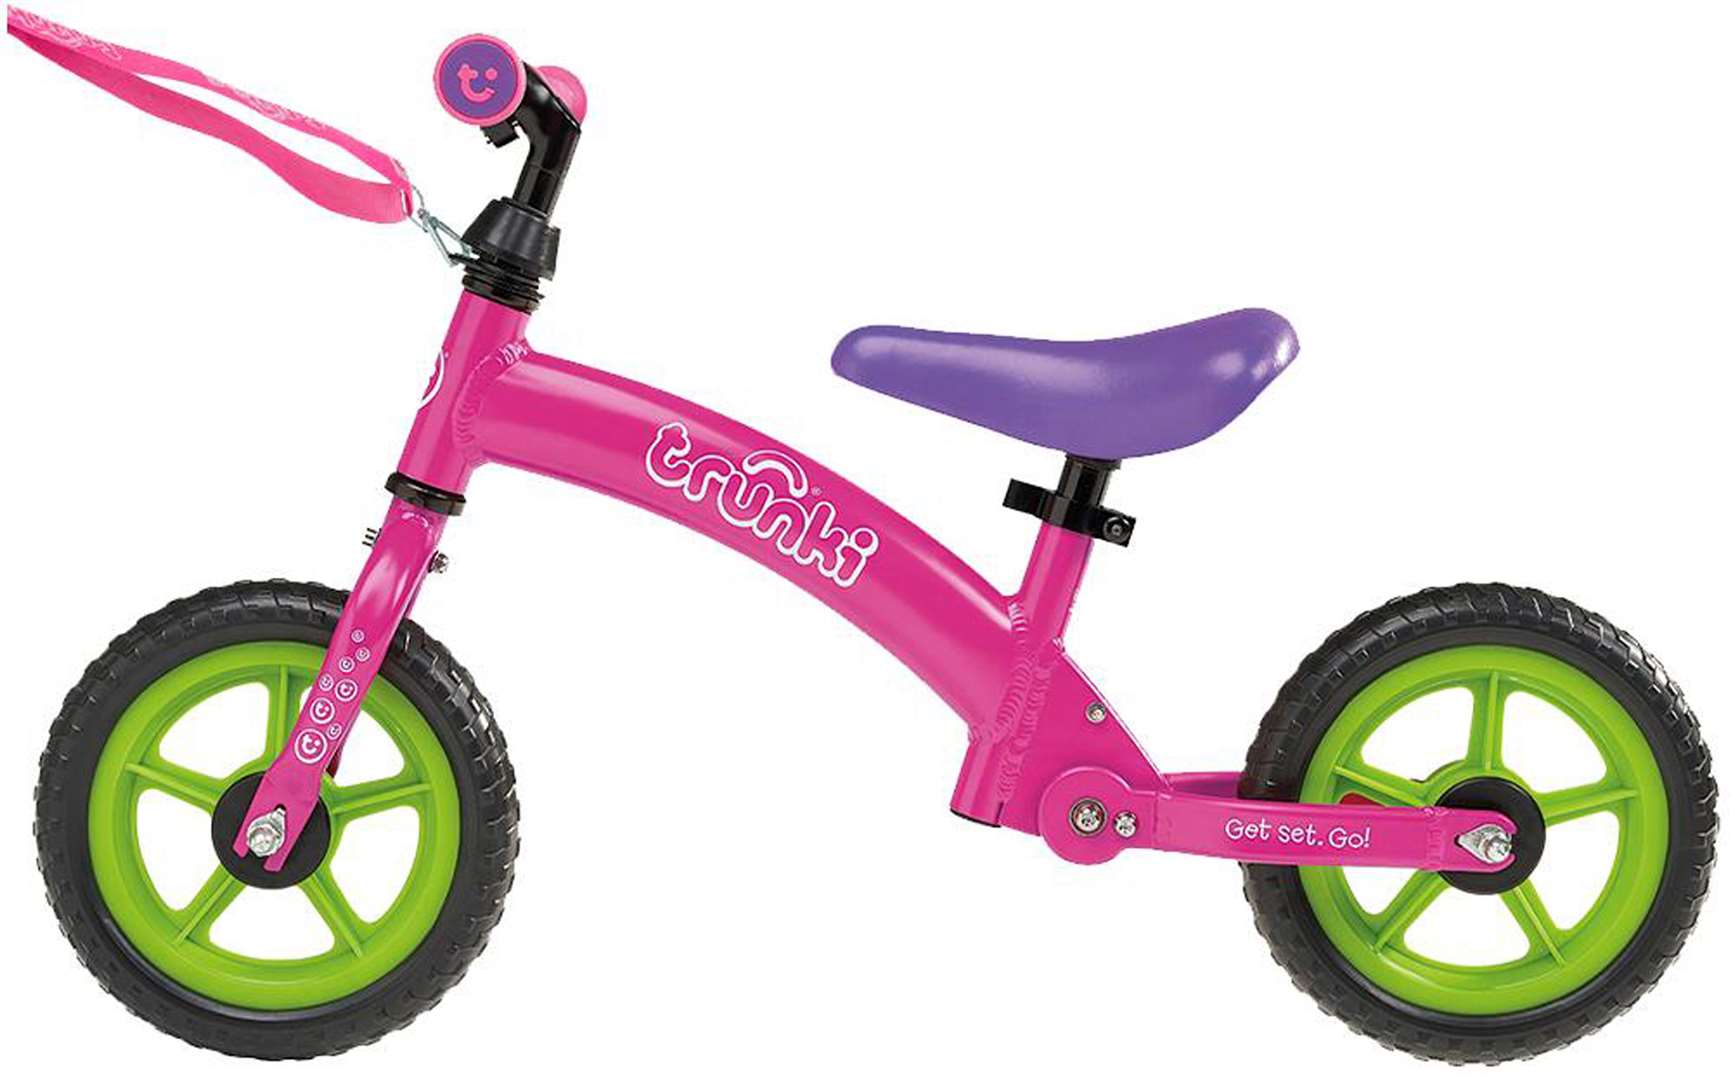 For wheel-y good toddlers everywhere. Trunki folding balance bike, from £65, Halfords. Also comes in blue